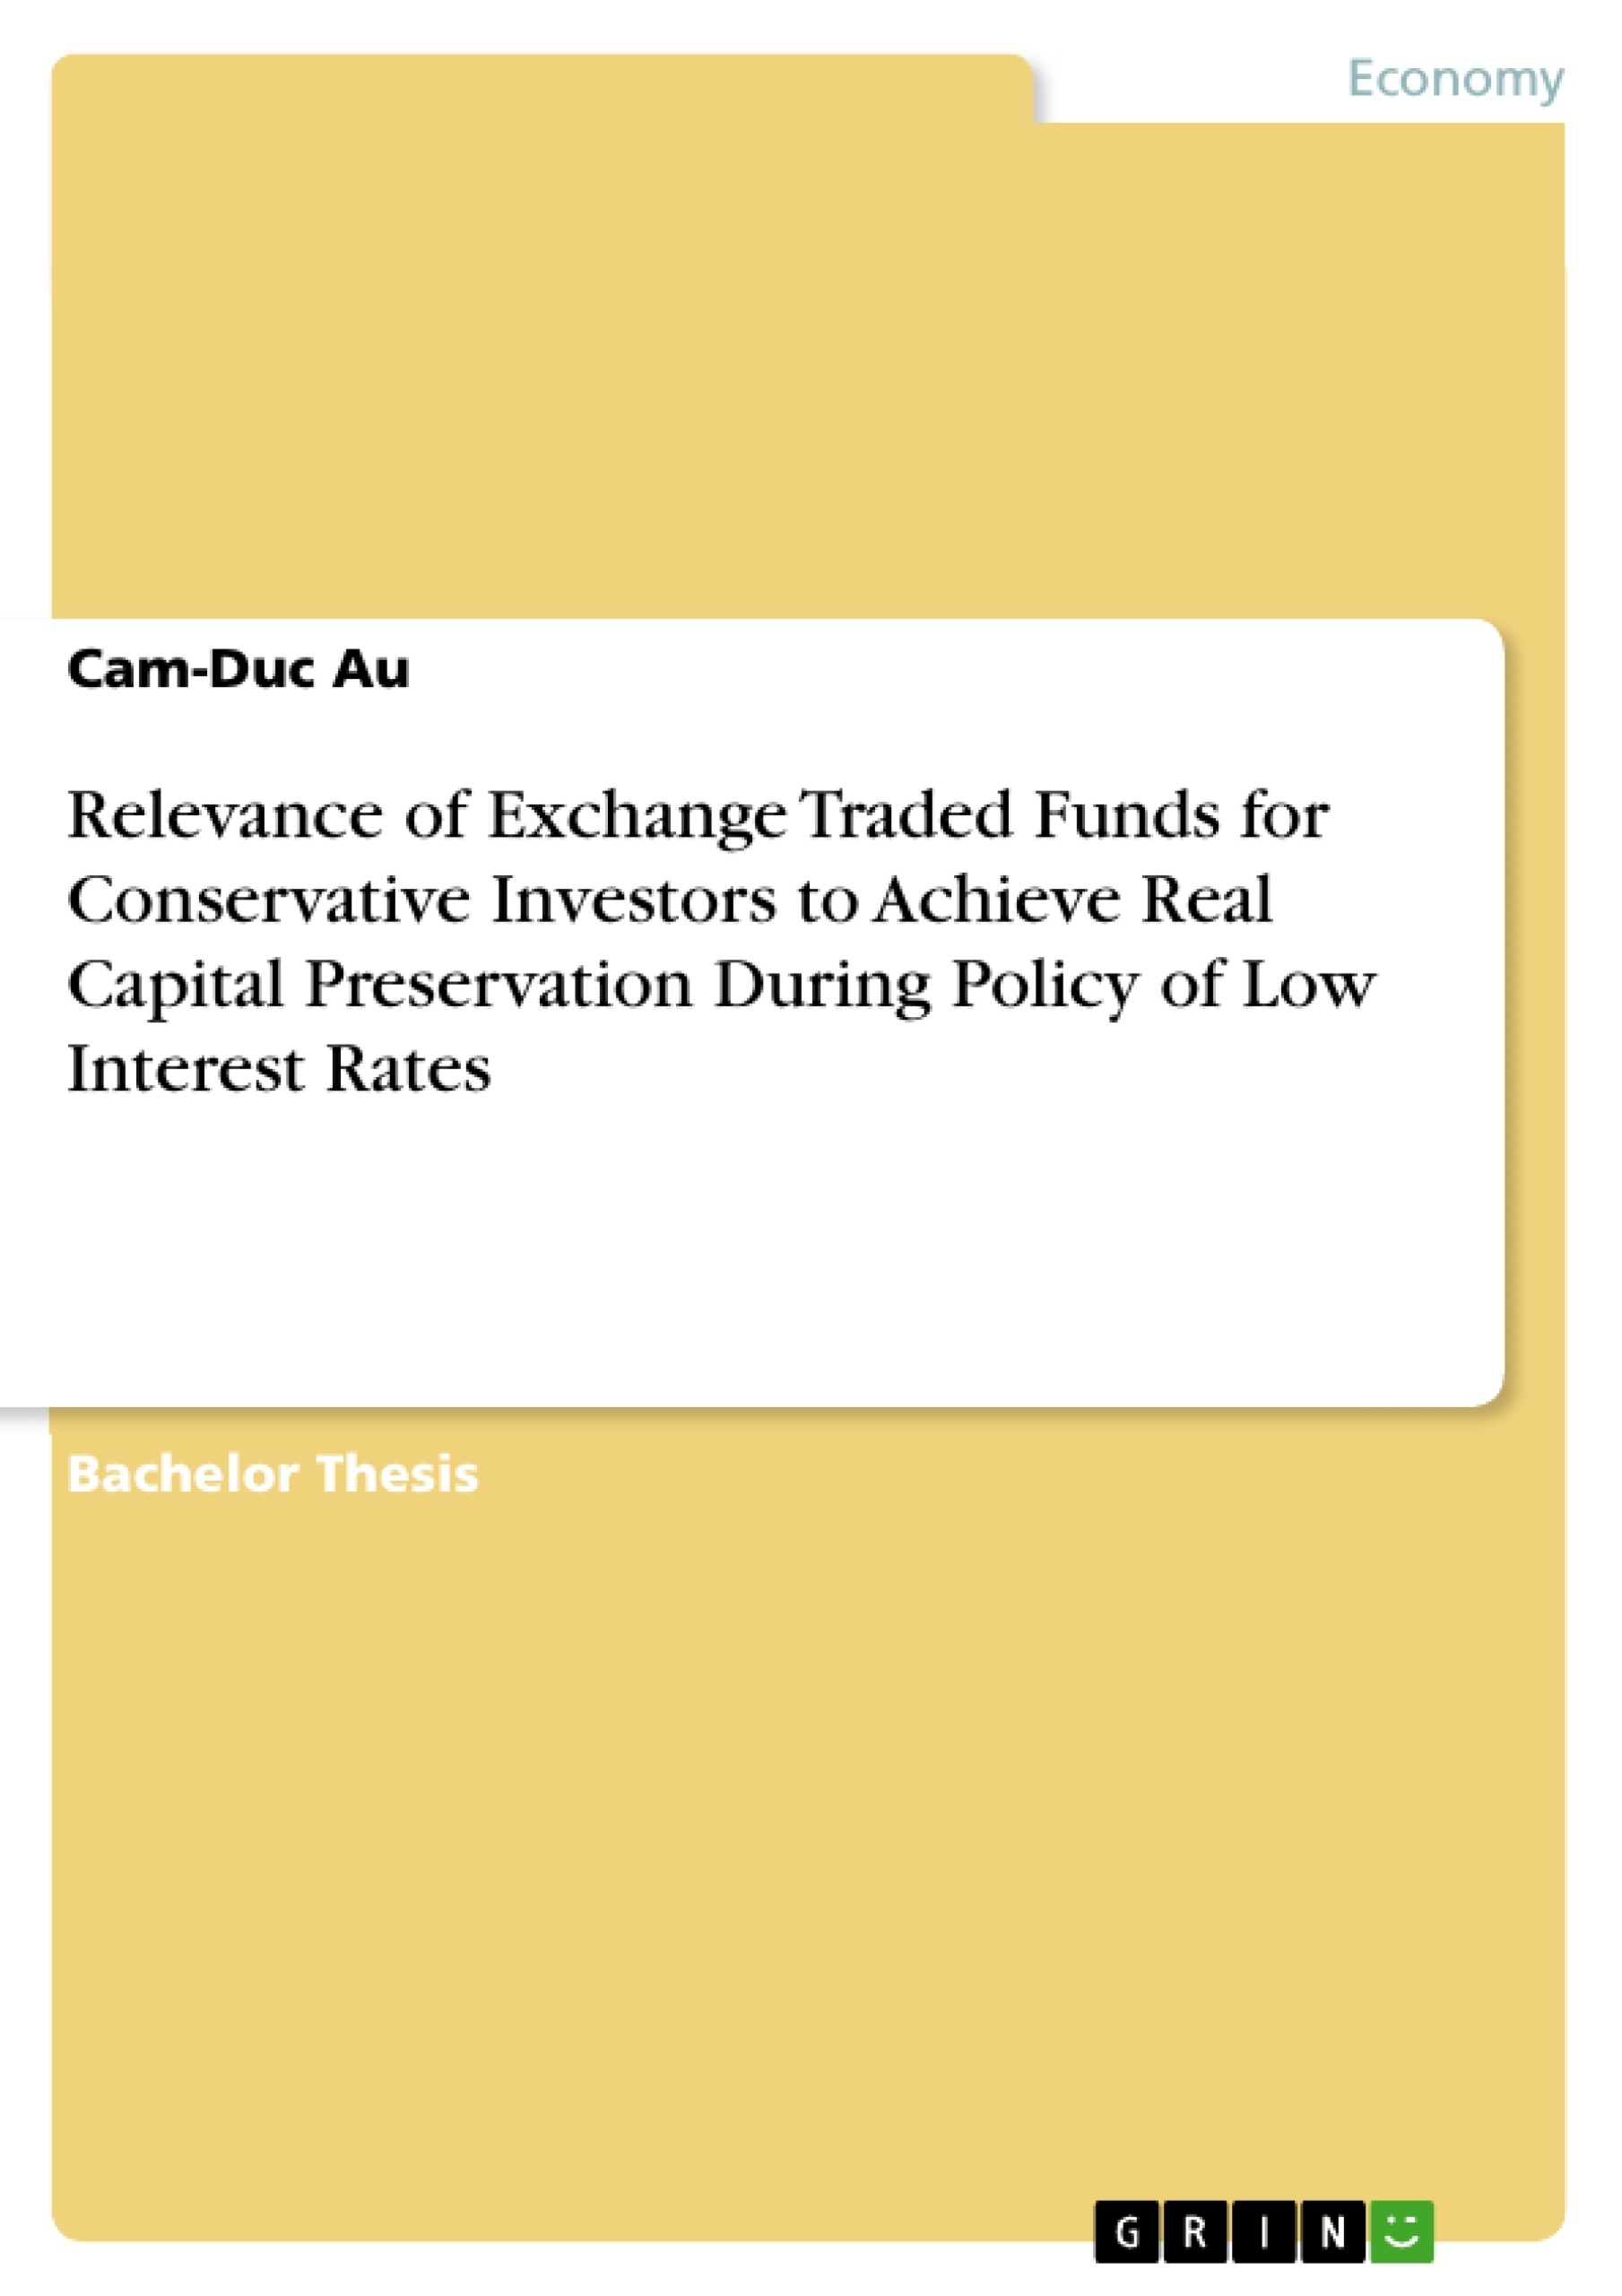 Title: Relevance of Exchange Traded Funds for Conservative Investors to Achieve Real Capital Preservation During Policy of Low Interest Rates